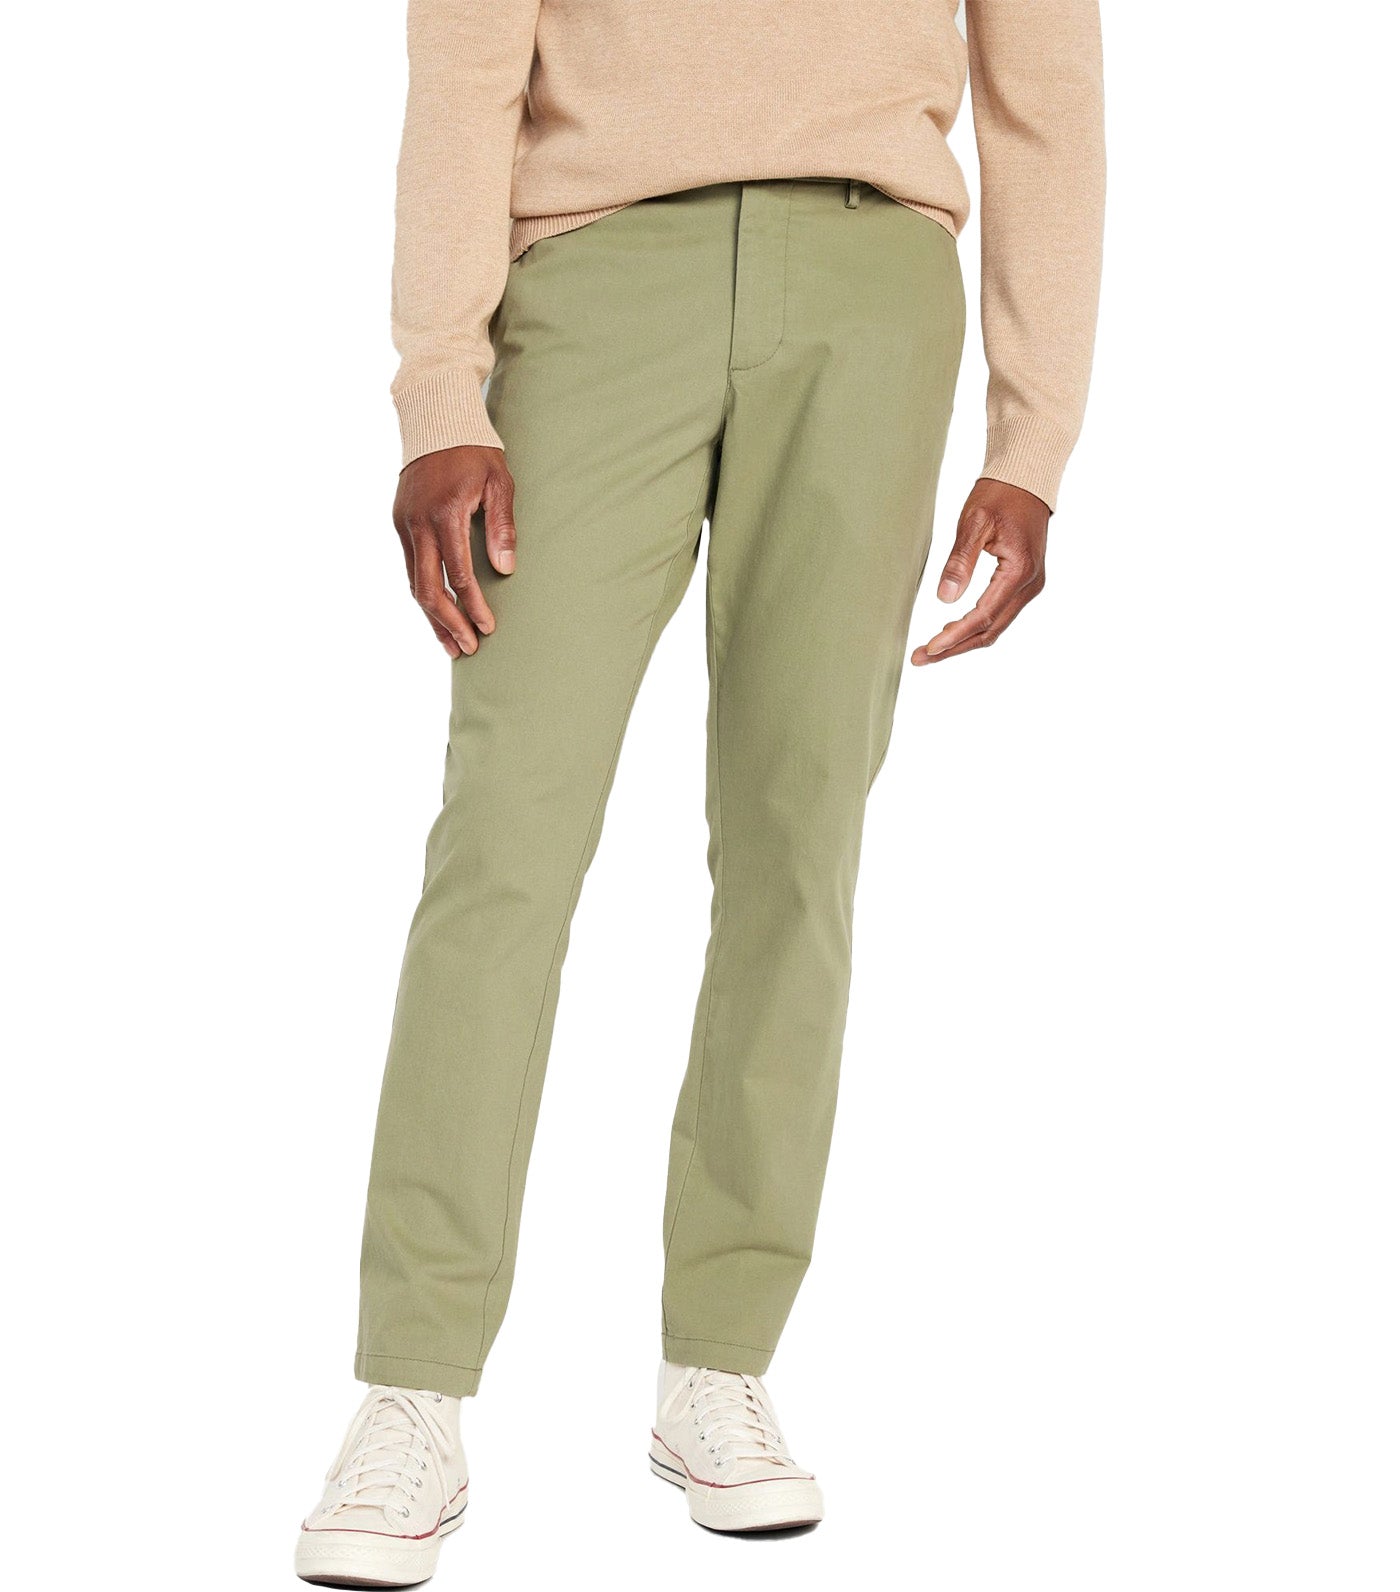 Slim Built-In Flex Rotation Chino Pants for Men Simply Sage